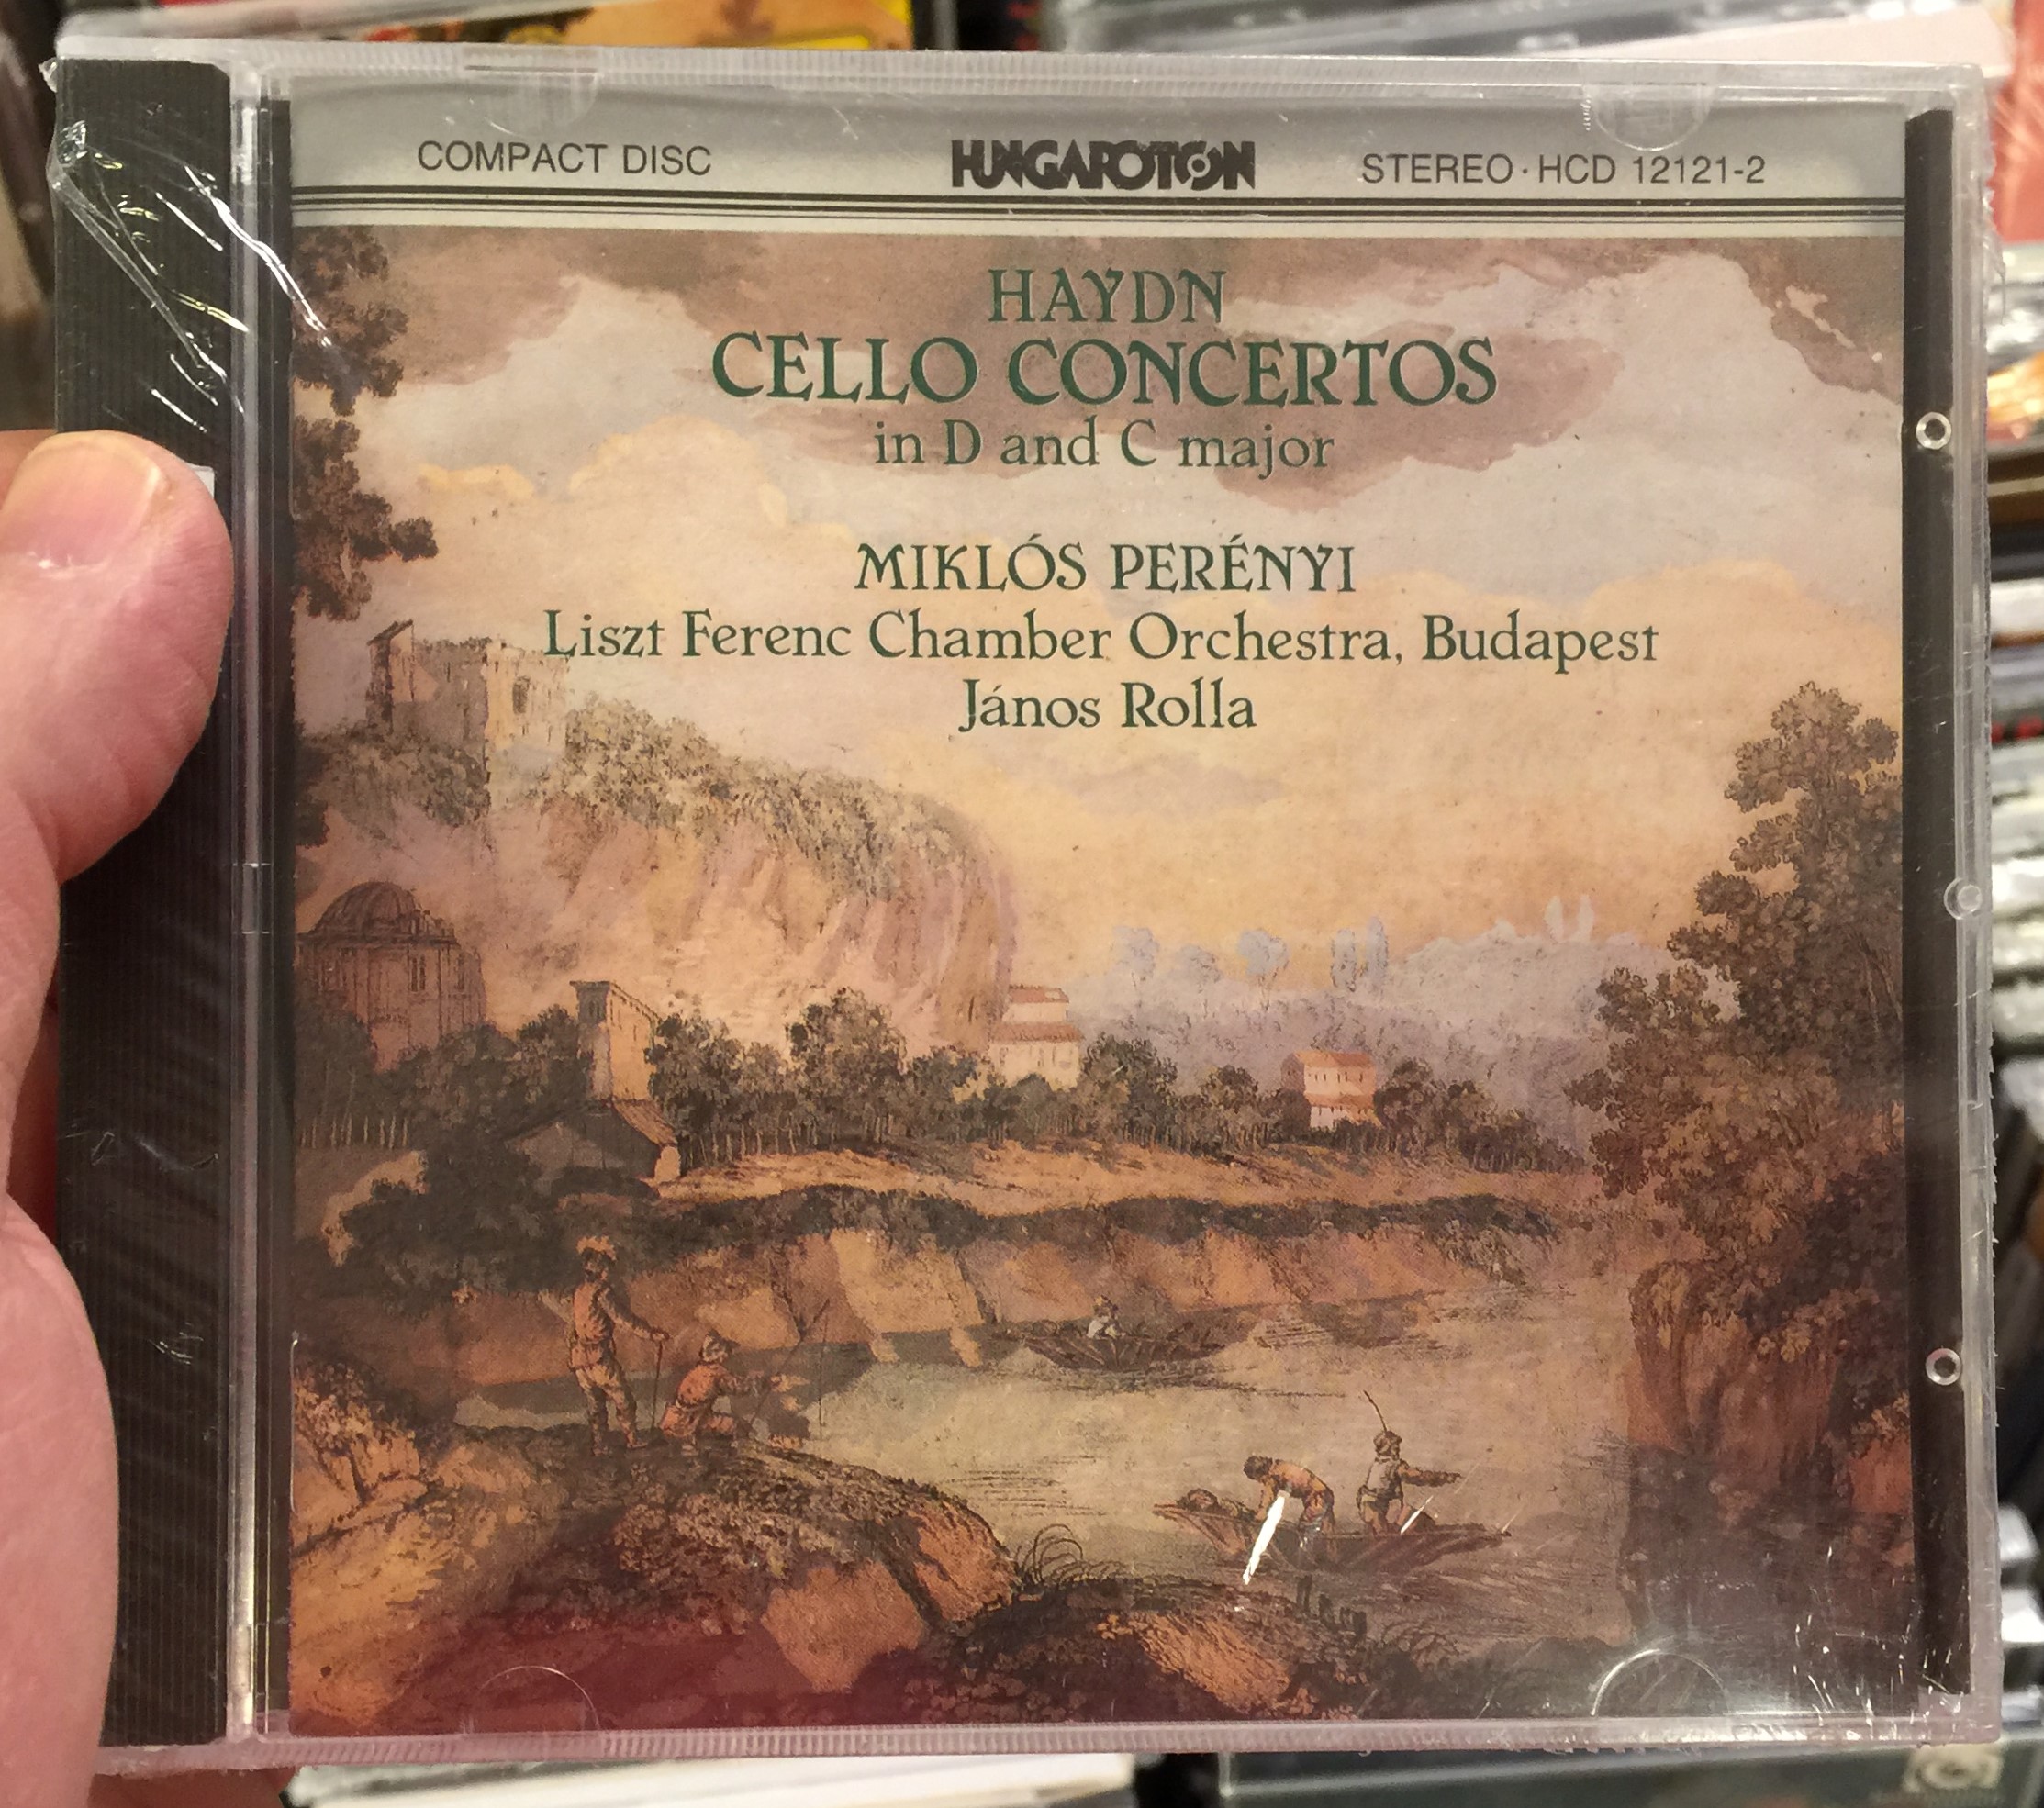 haydn-cello-concertos-in-d-and-c-major-mikl-s-per-nyi-liszt-ferenc-chamber-orchestra-j-nos-rolla-hungaroton-audio-cd-1980-stereo-hcd-12121-2-1-.jpg